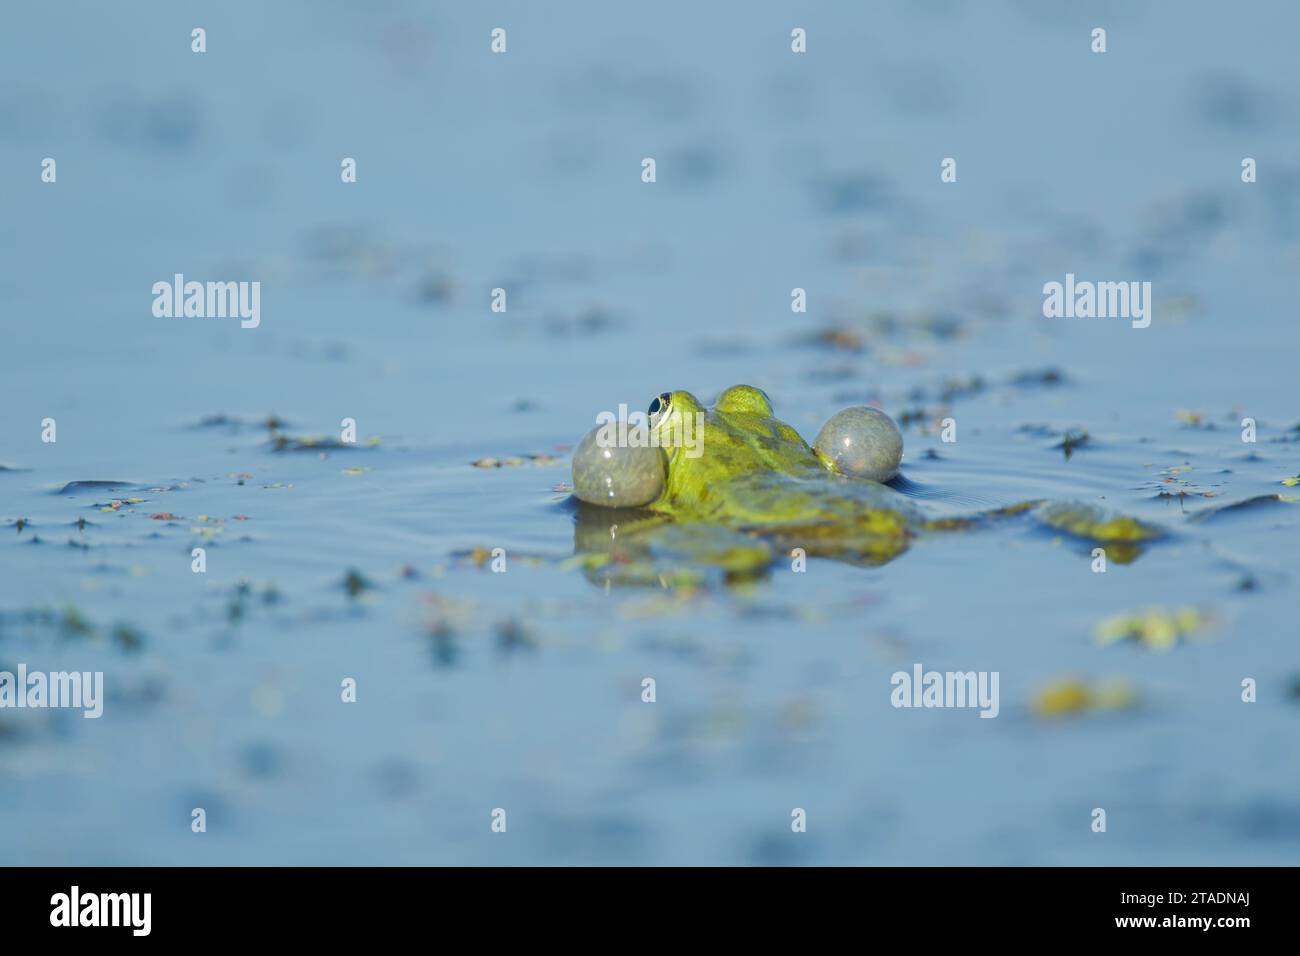 Marsh frog (Pelophylax ridibundus) (formerly Rana ridibunda) with vocal sacs inflated viewed in the Danube delta complex of lagoons water among vegeta Stock Photo